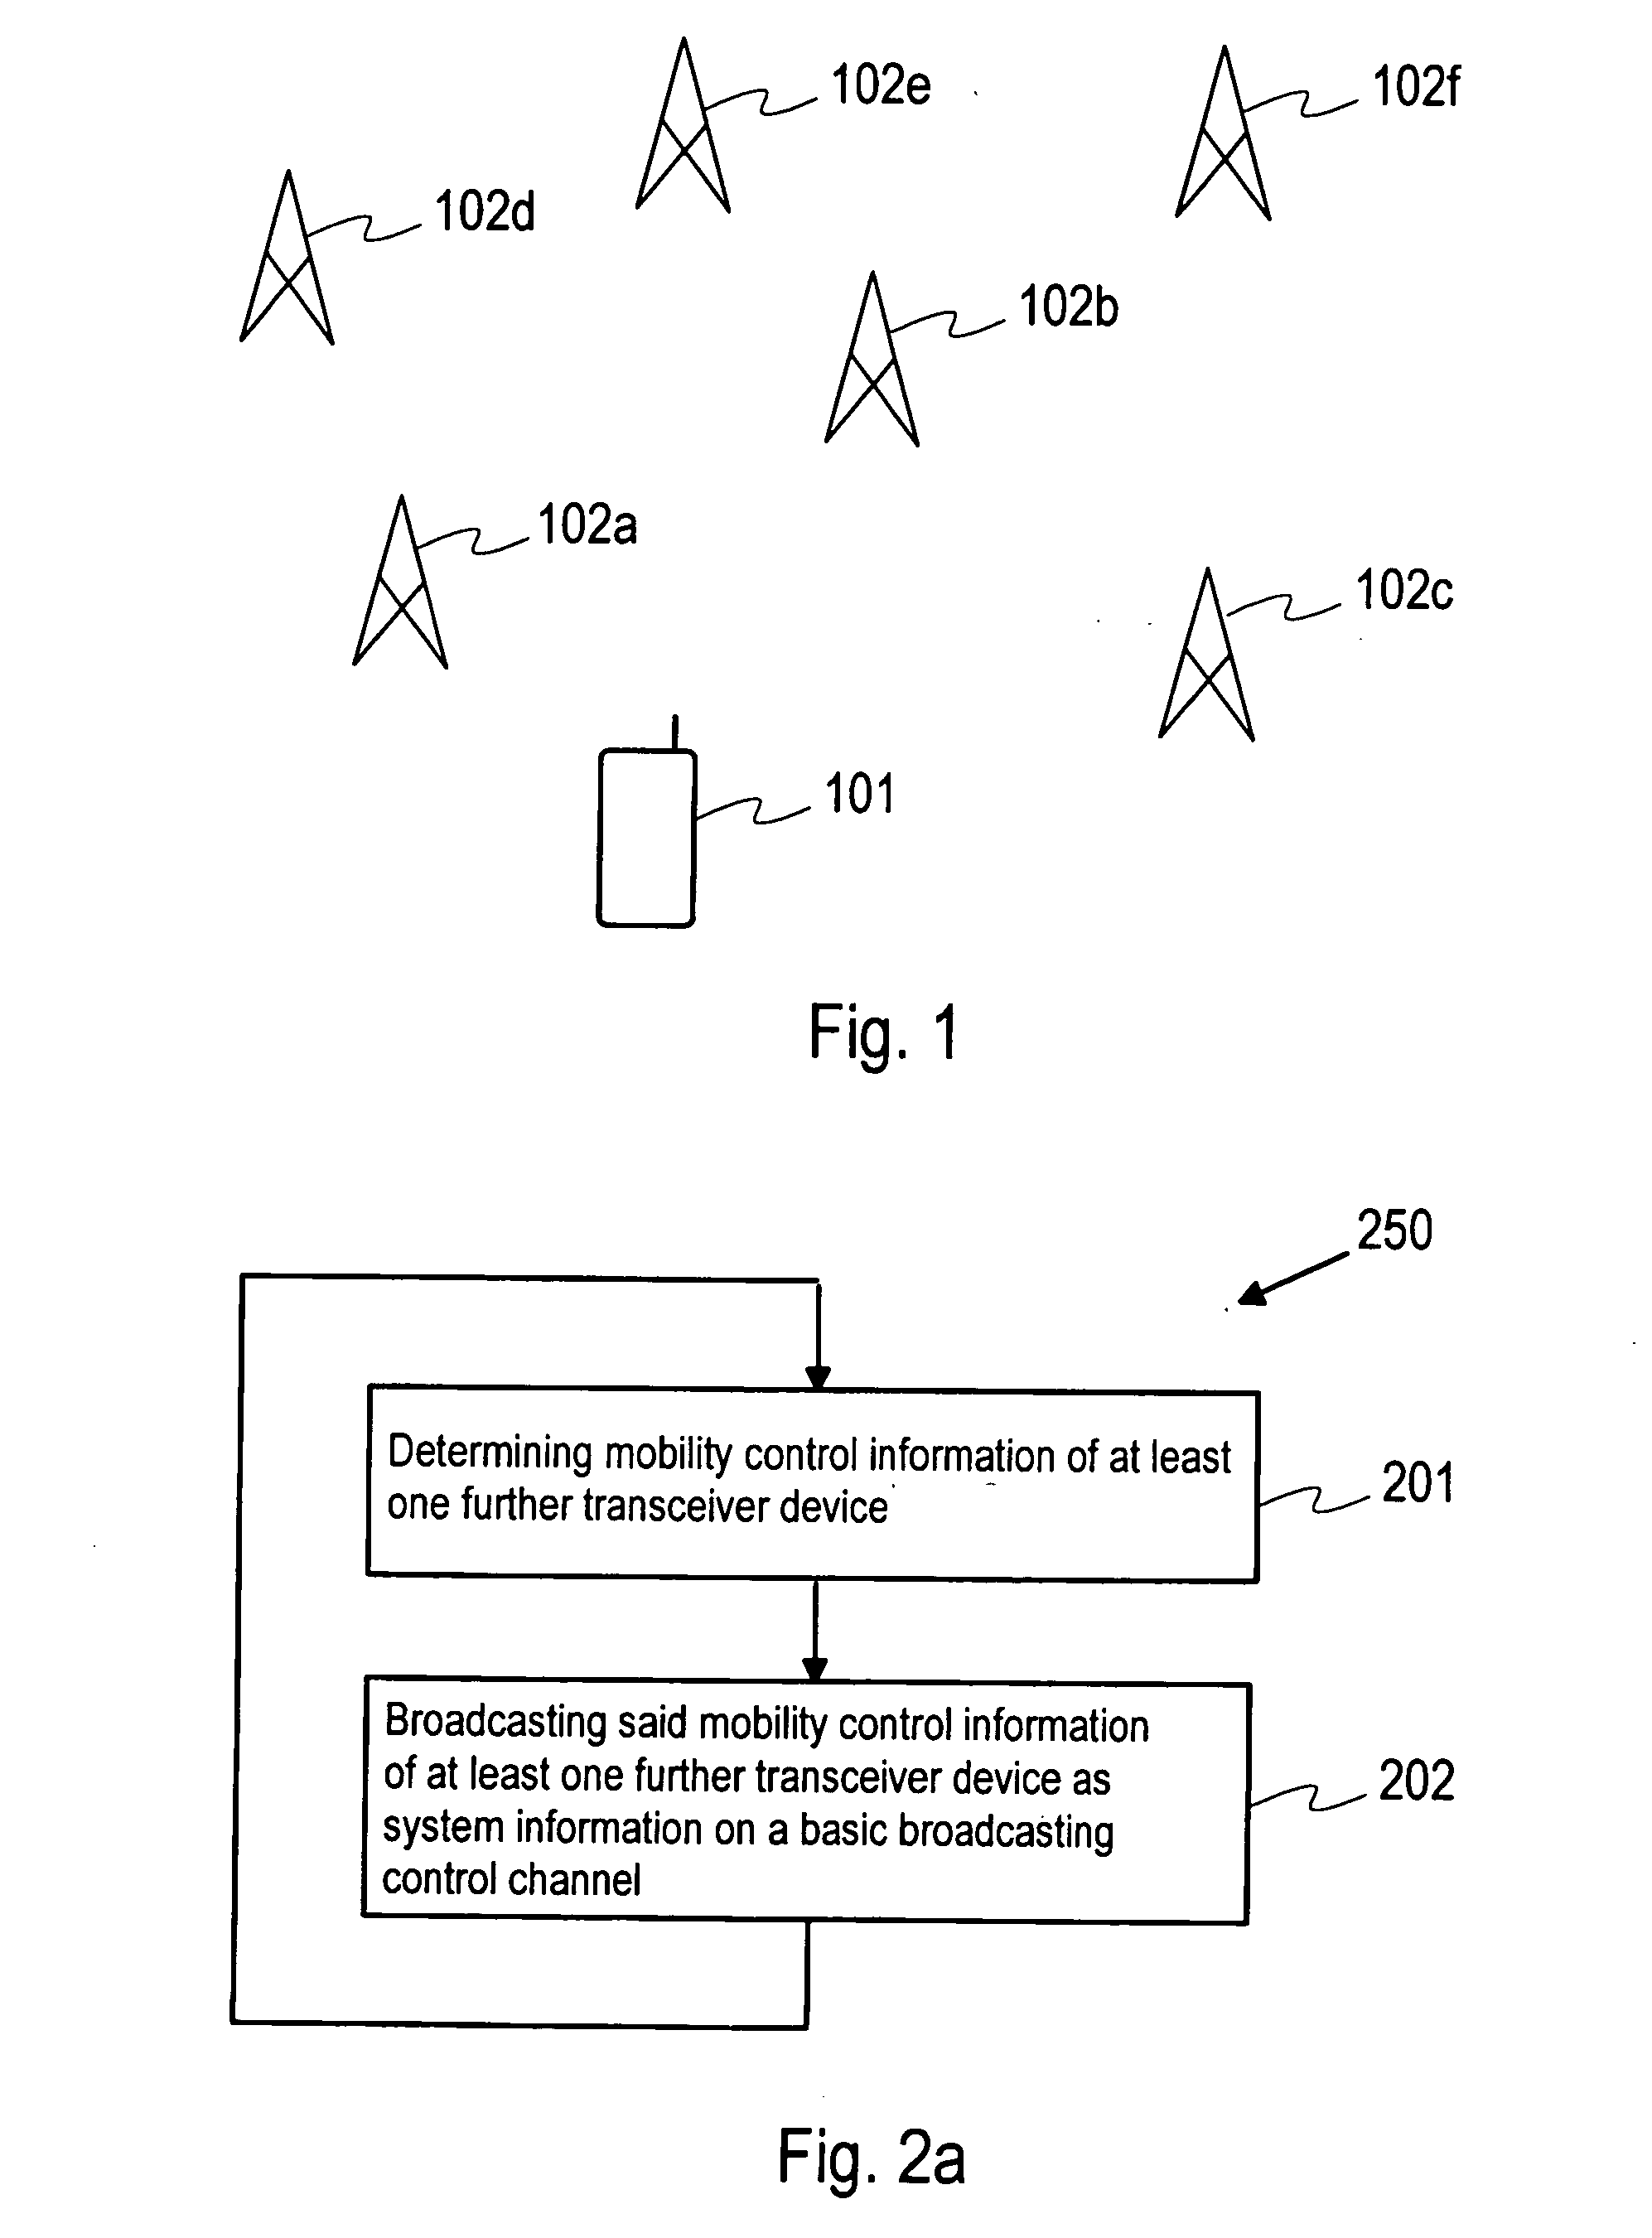 Providing mobility control information to a communications device